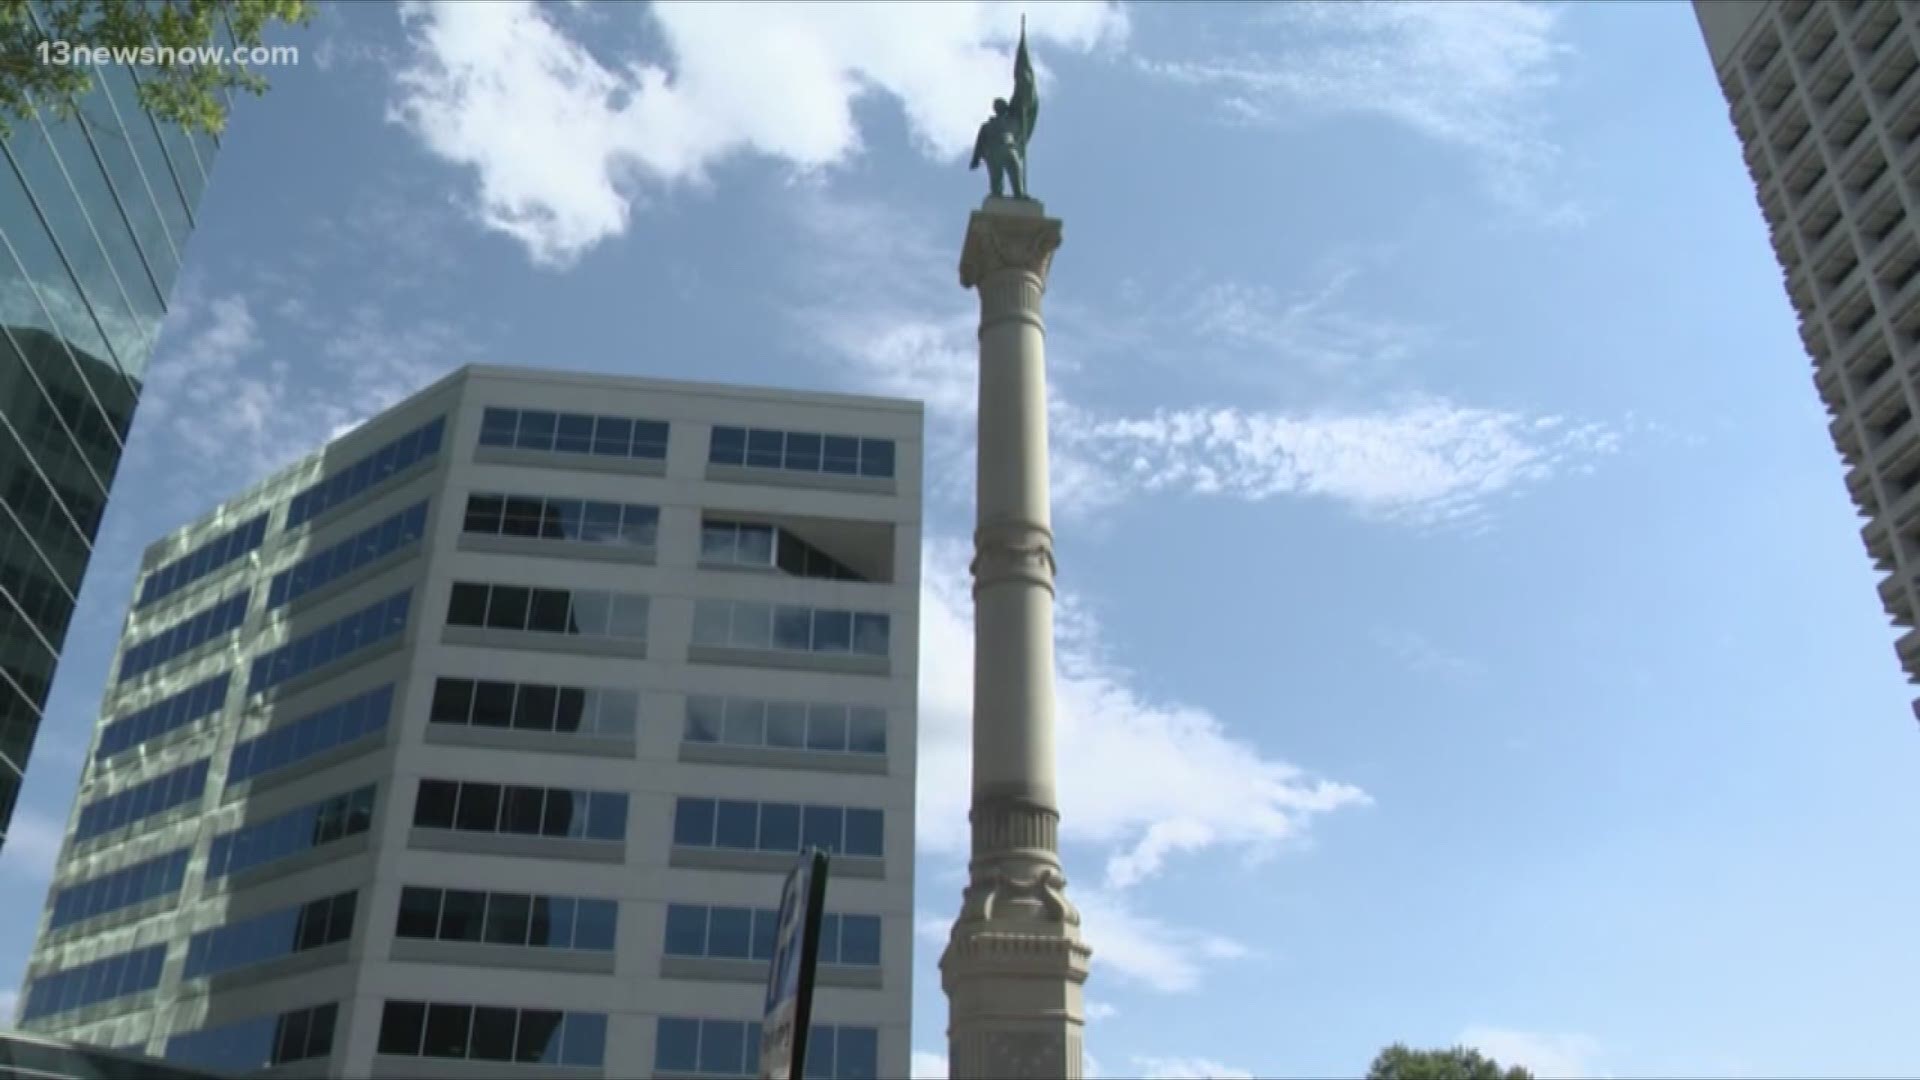 The city wants to remove the Confederate monument standing in downtown Norfolk, citing its 'constitutional right to move [the monument] from where it now stands.'